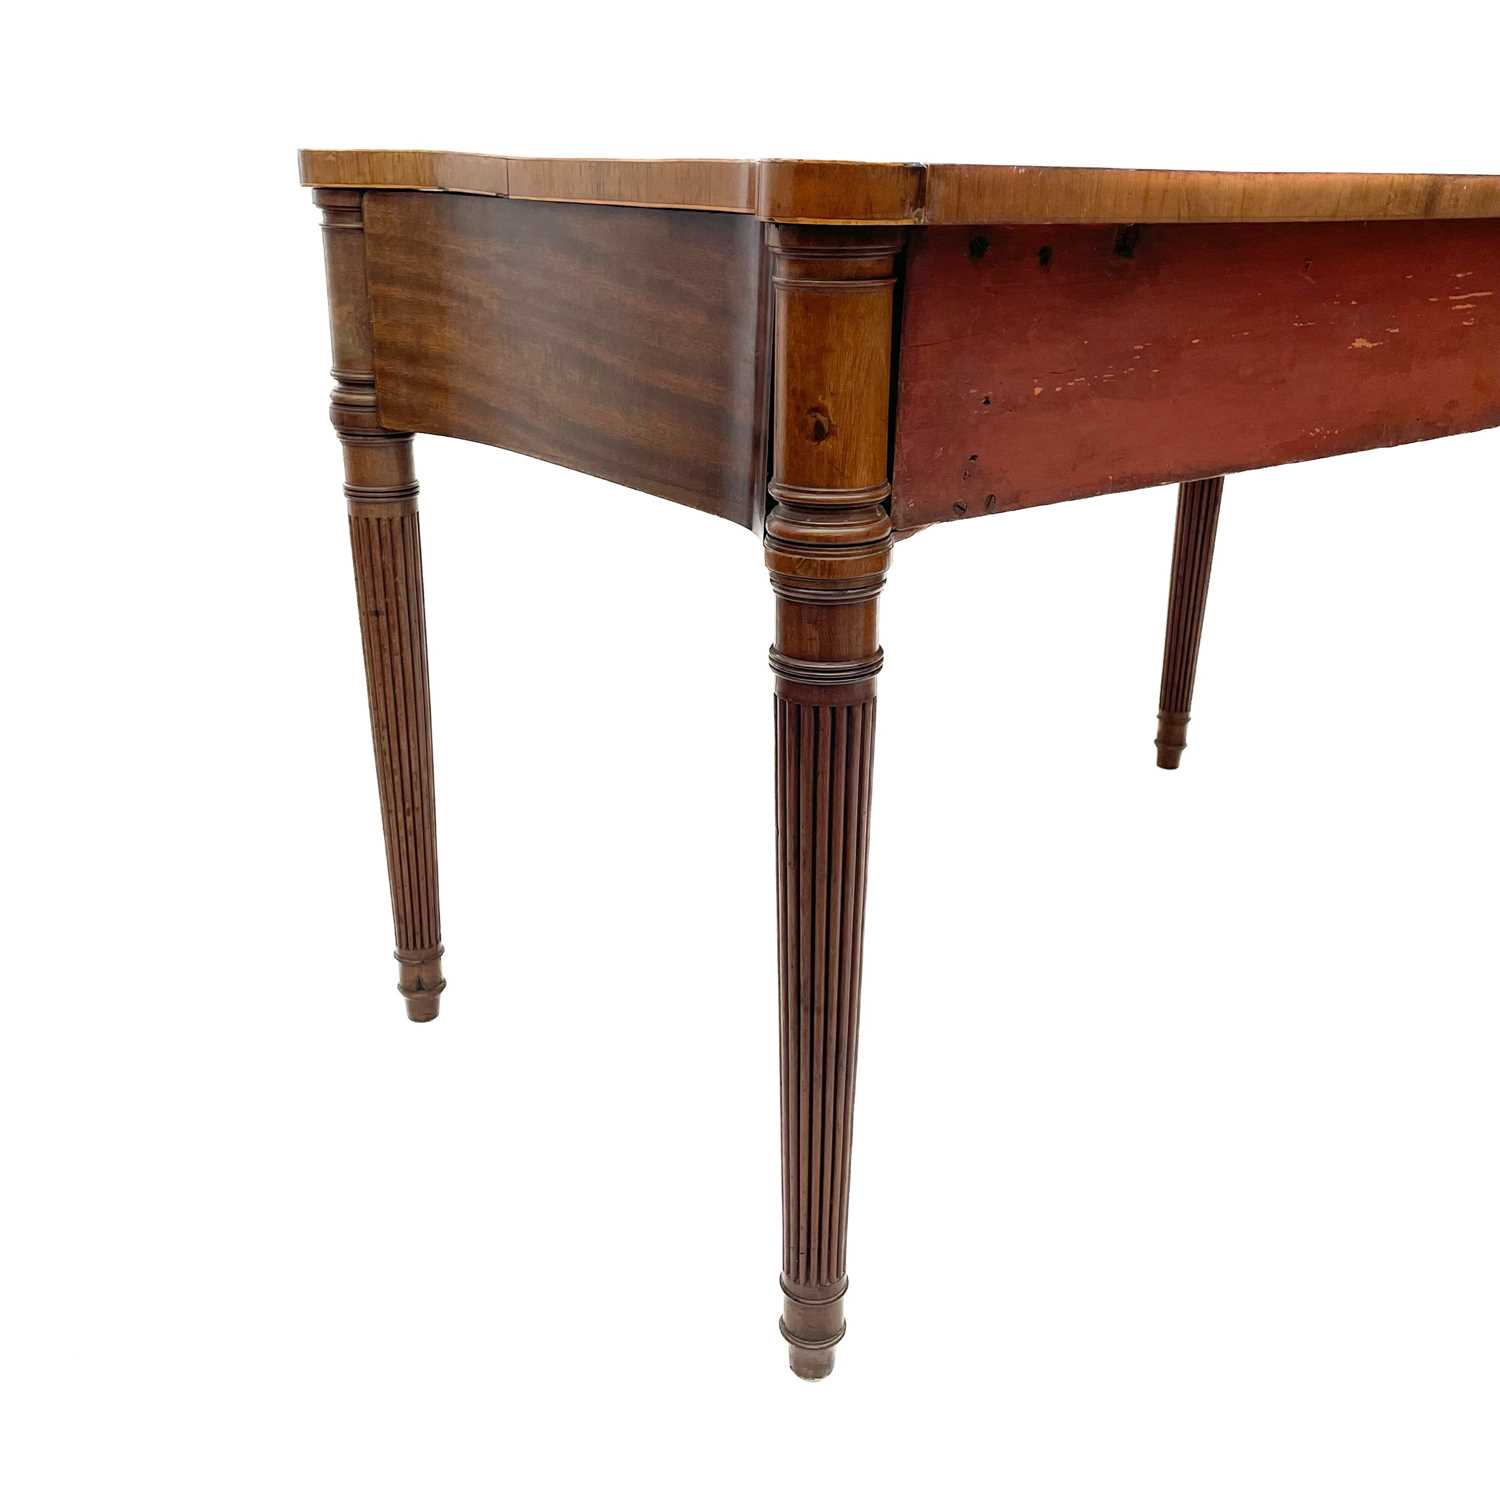 A George III mahogany and inlaid side table, possibly Irish. - Image 5 of 9